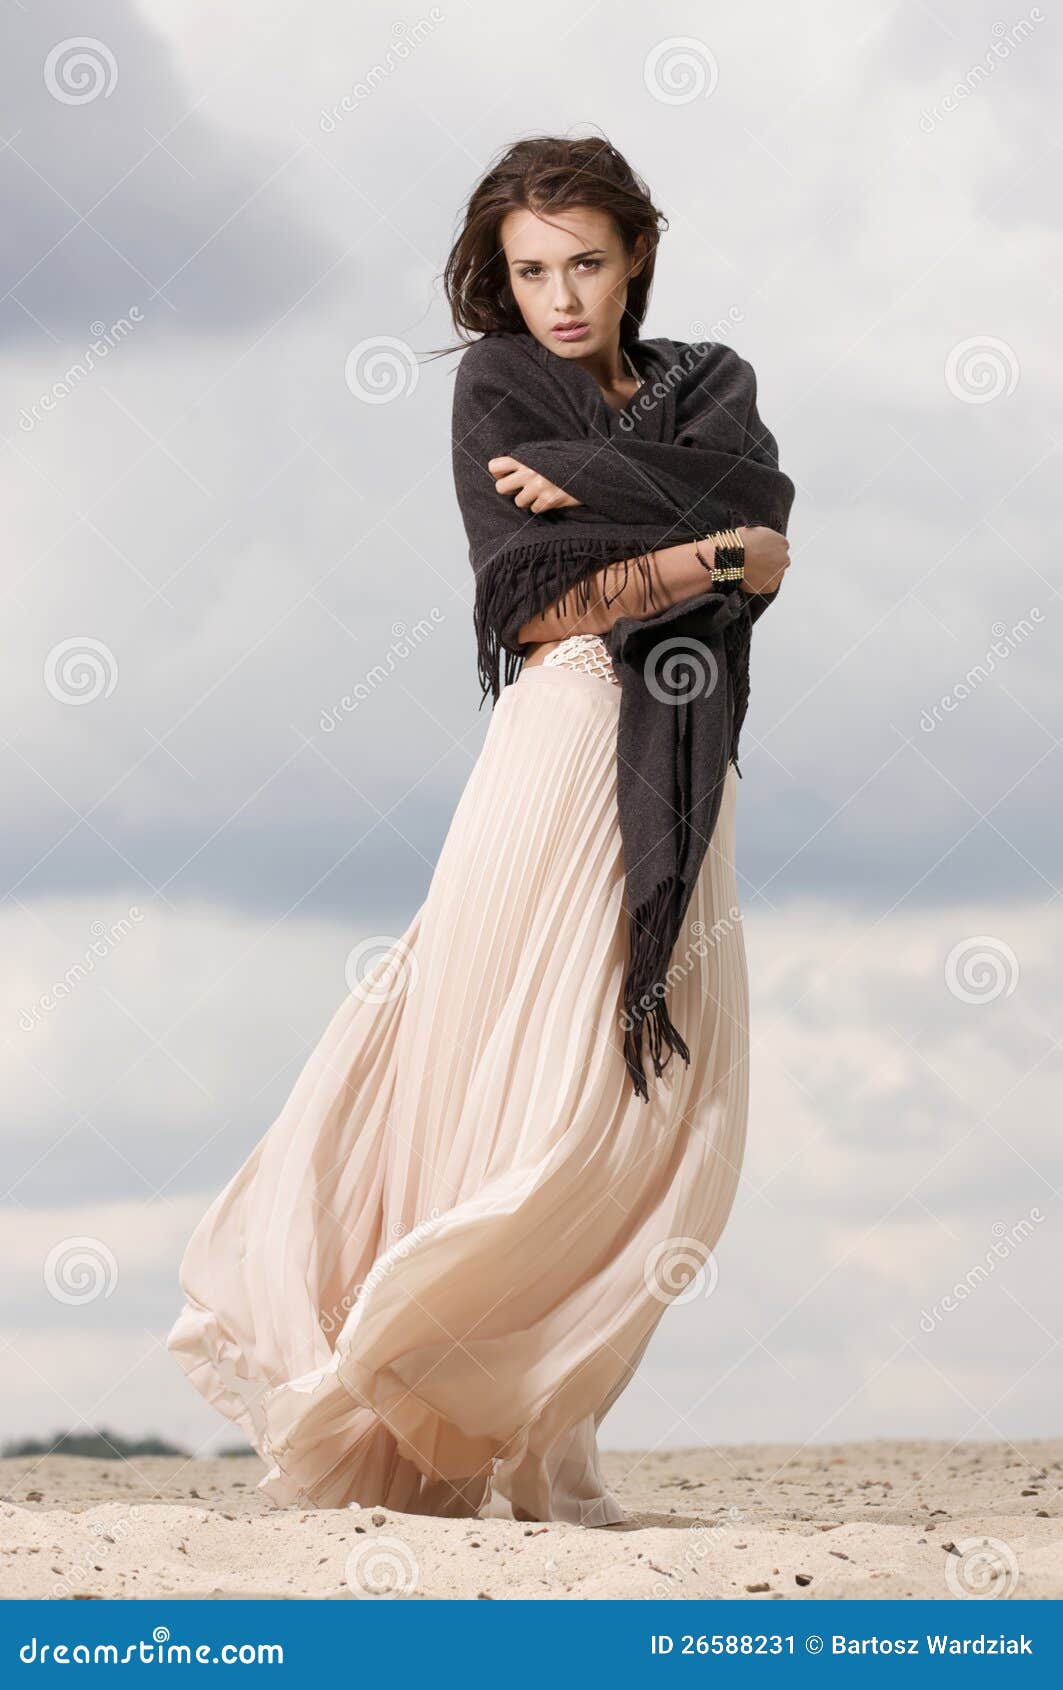 attractive and sensuality woman in the desert